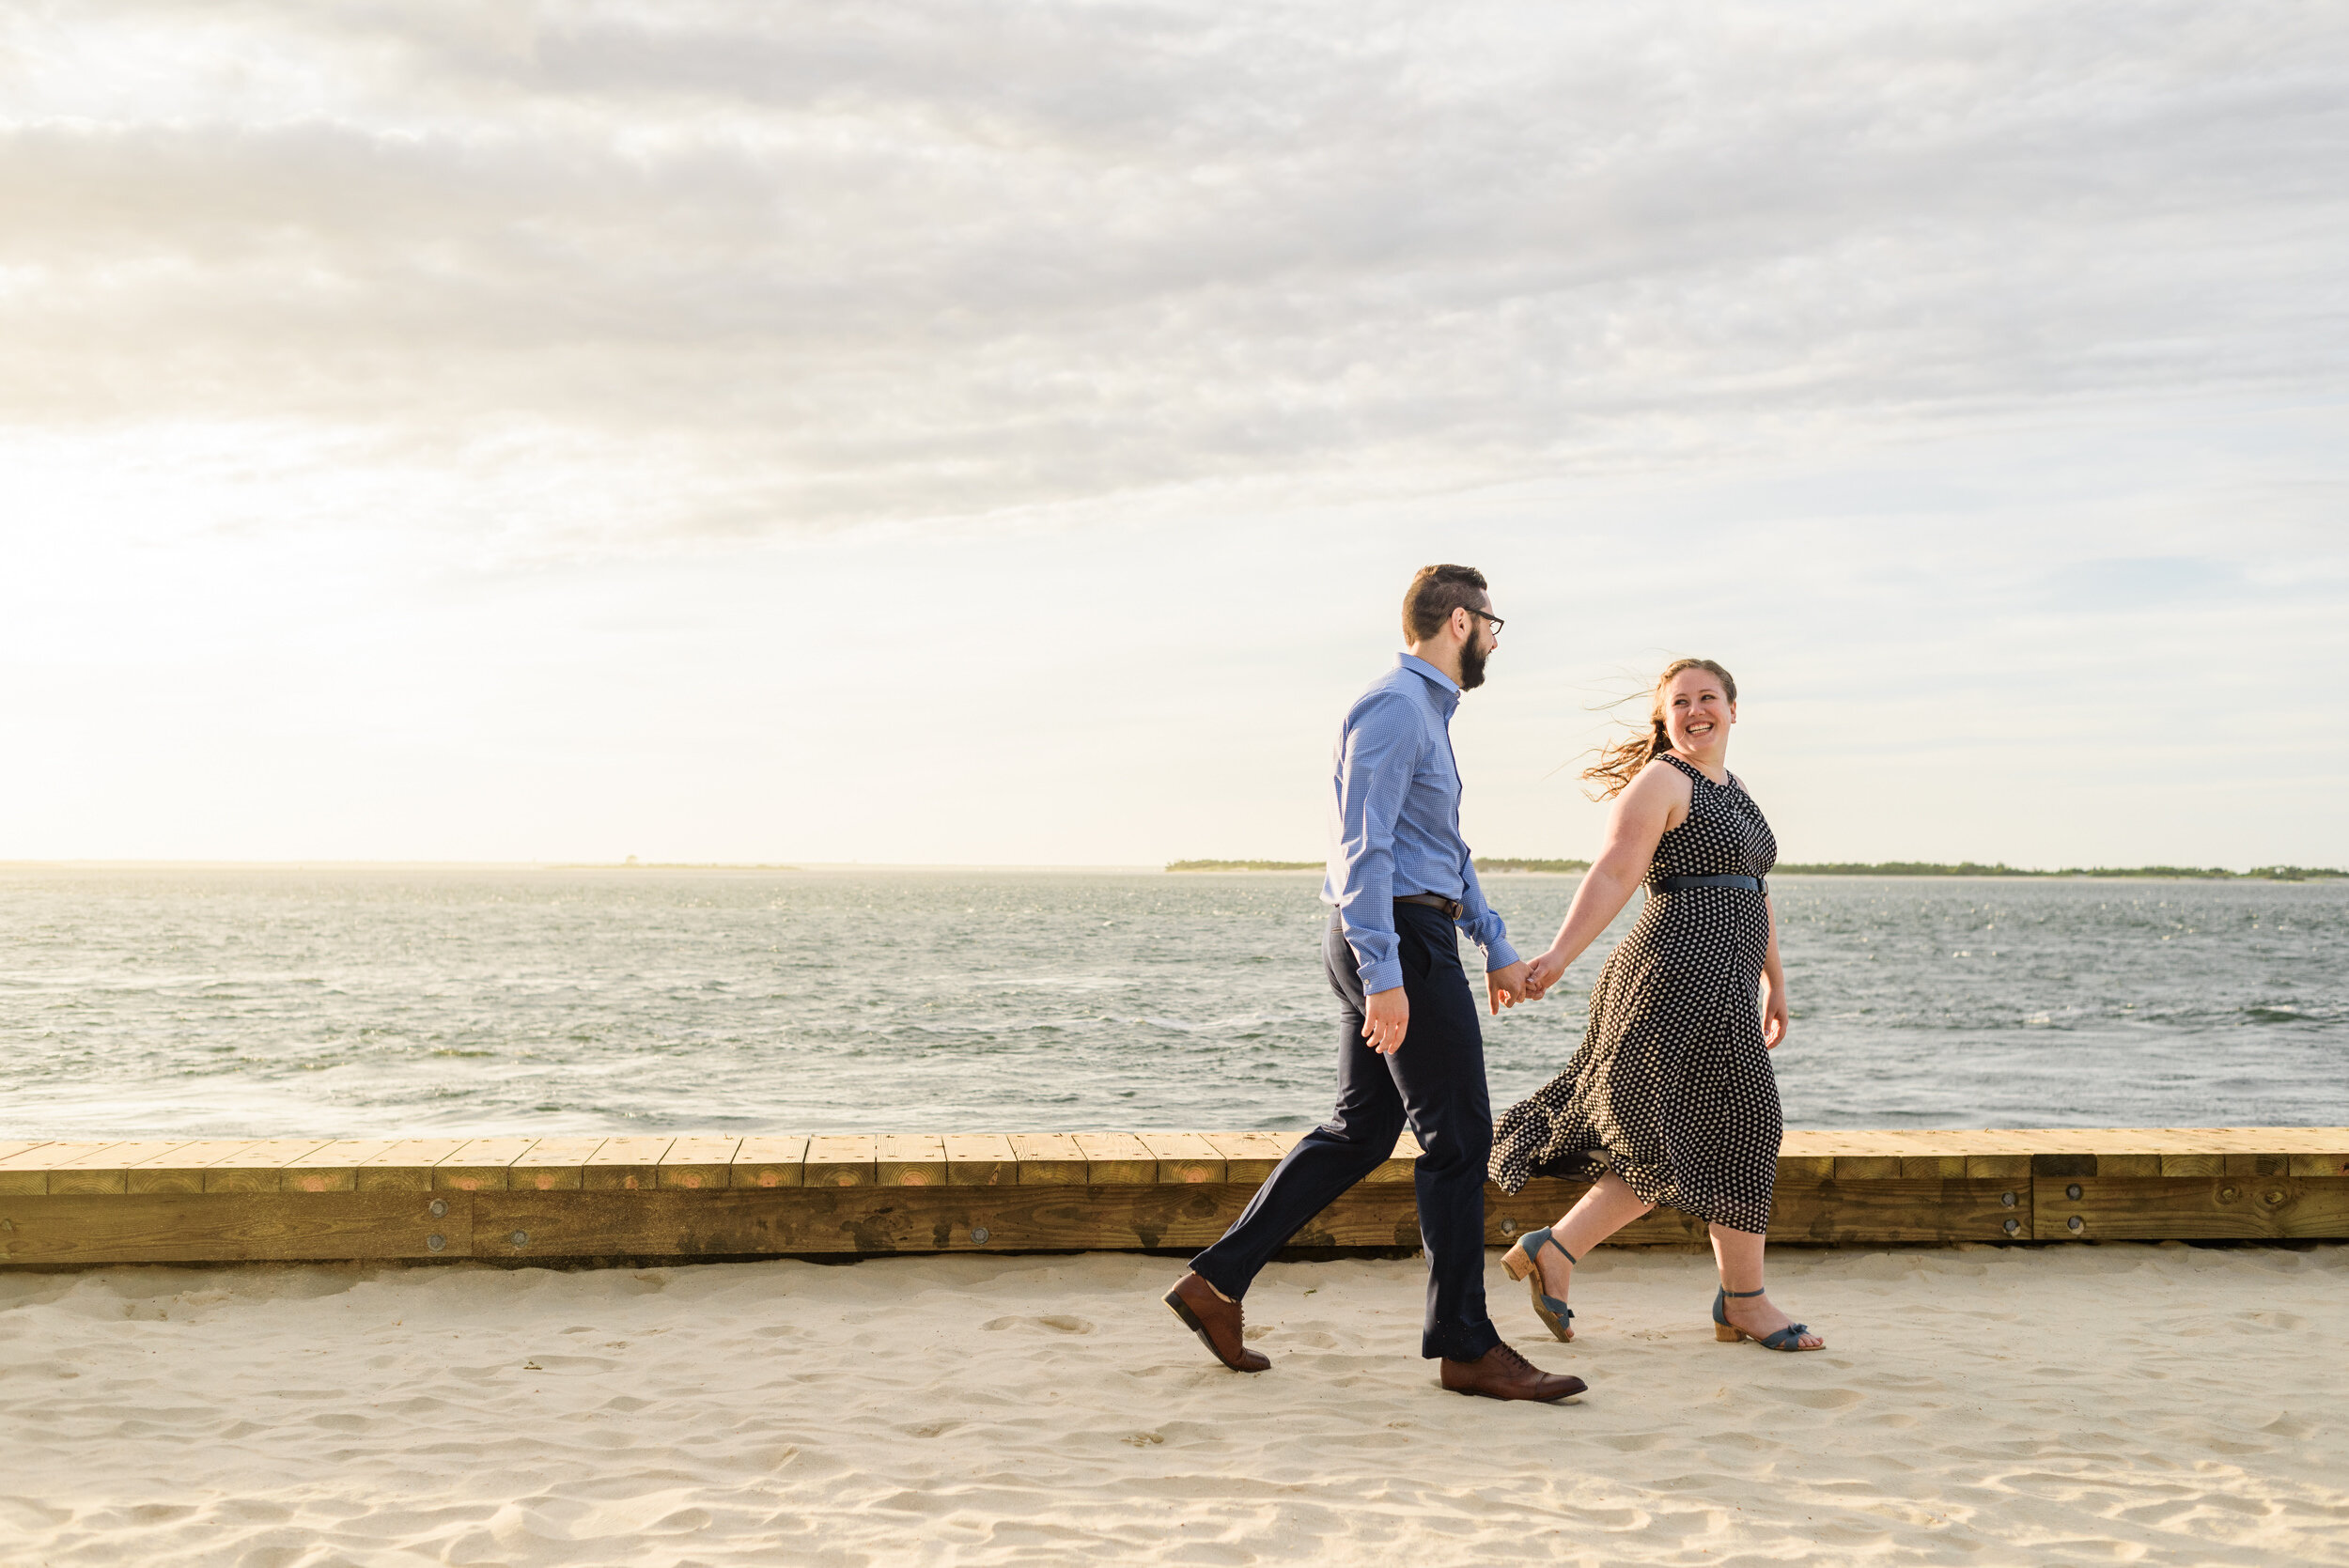 Engagement photos at Barnegat Lighthouse in Long Beach Island